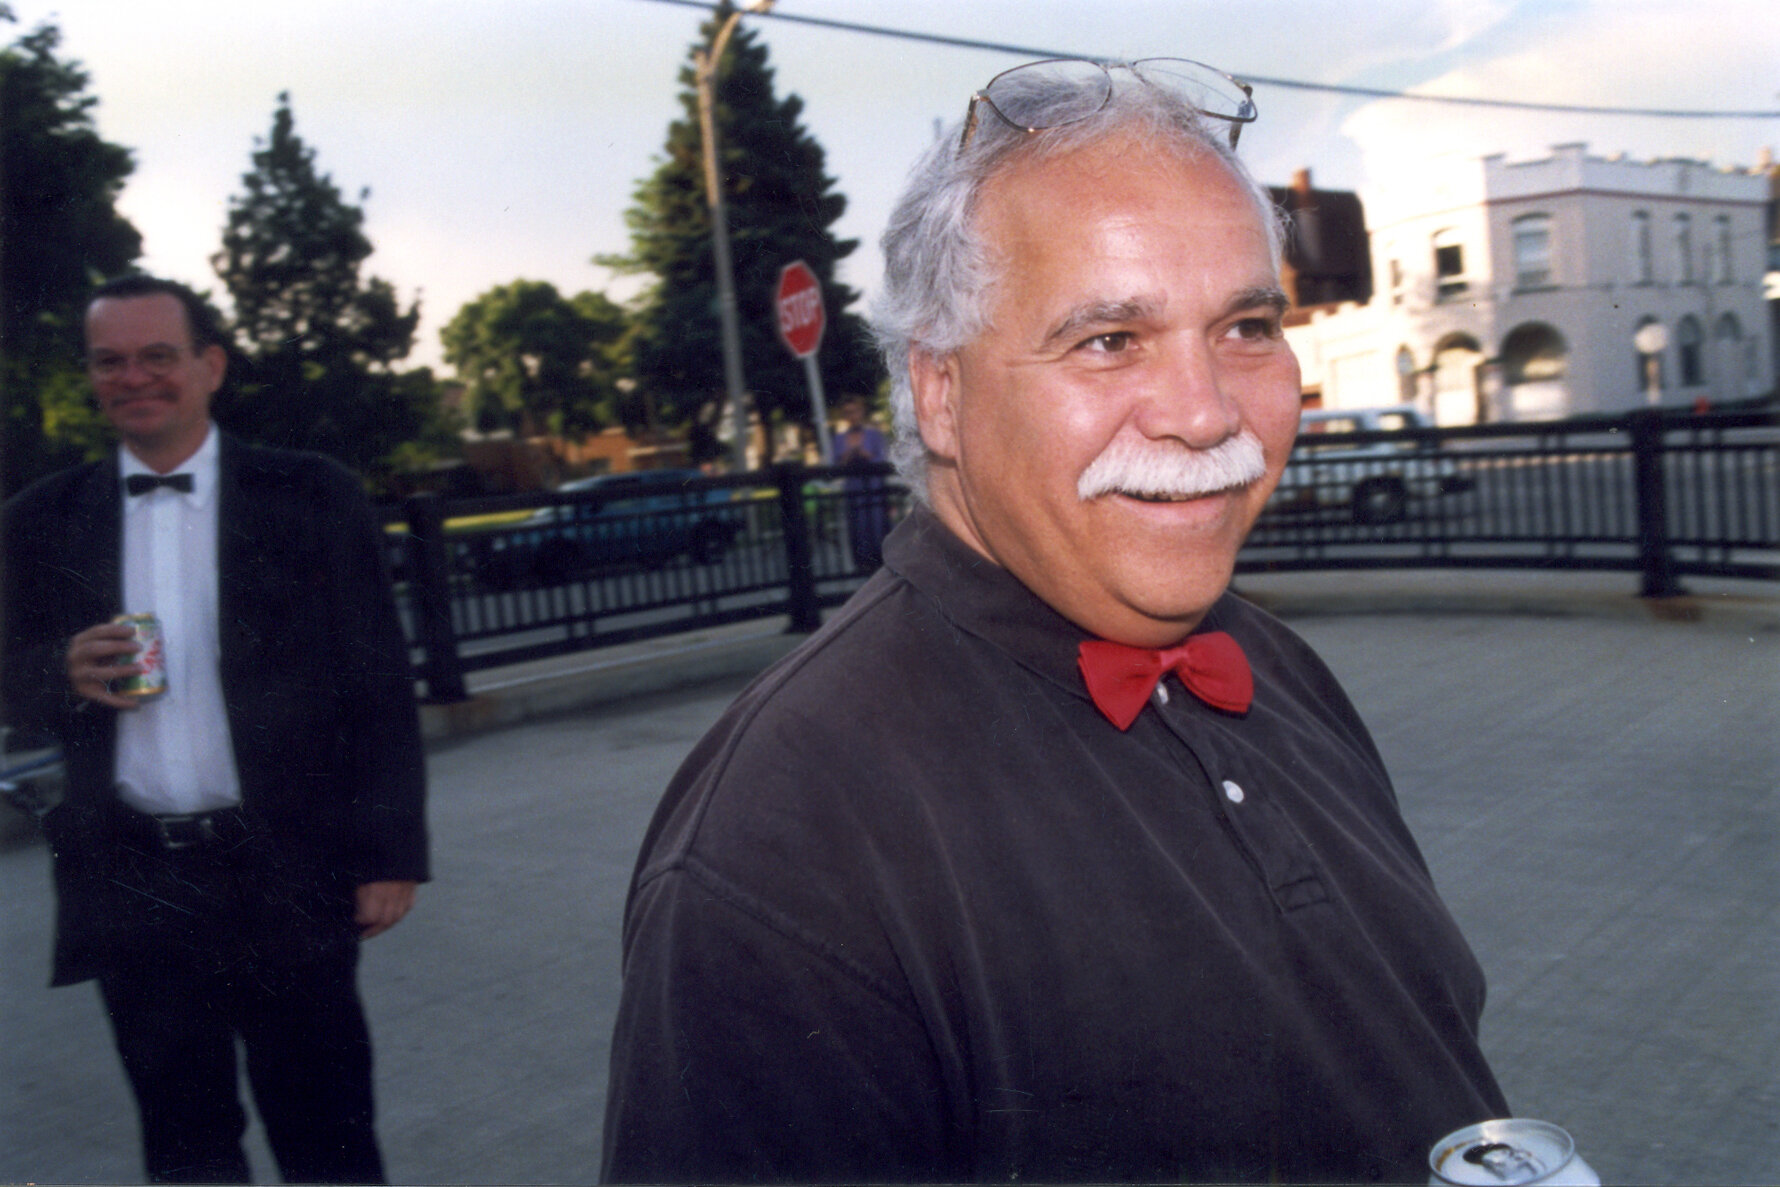 Man in black polo with red bow tie with glasses pushed on forehead smiles looking behind camera.